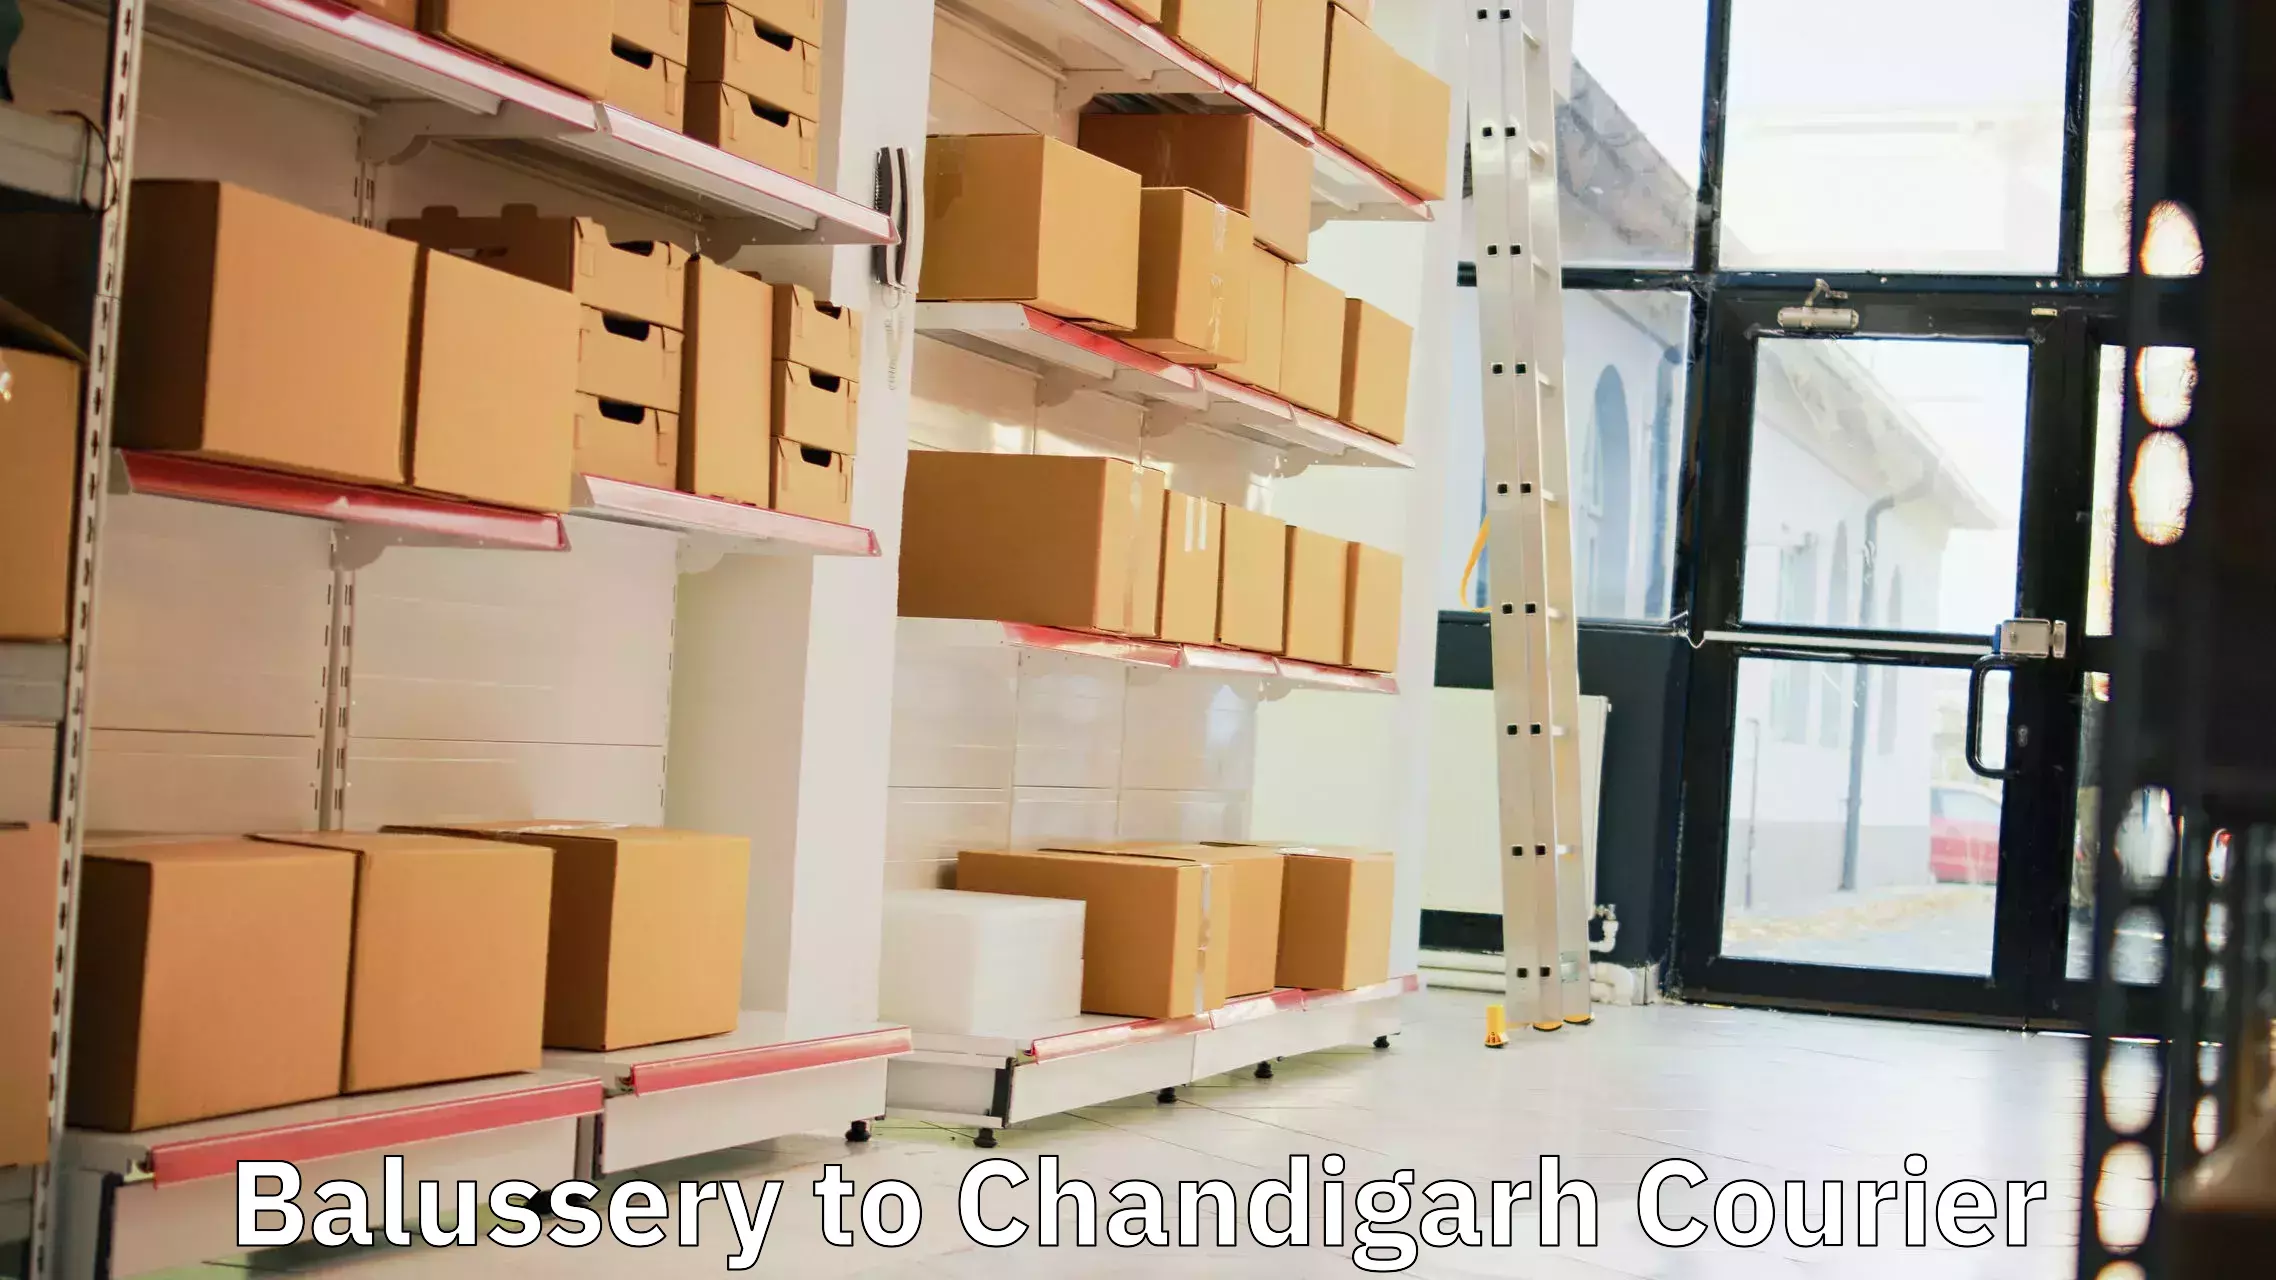 Express postal services Balussery to Chandigarh